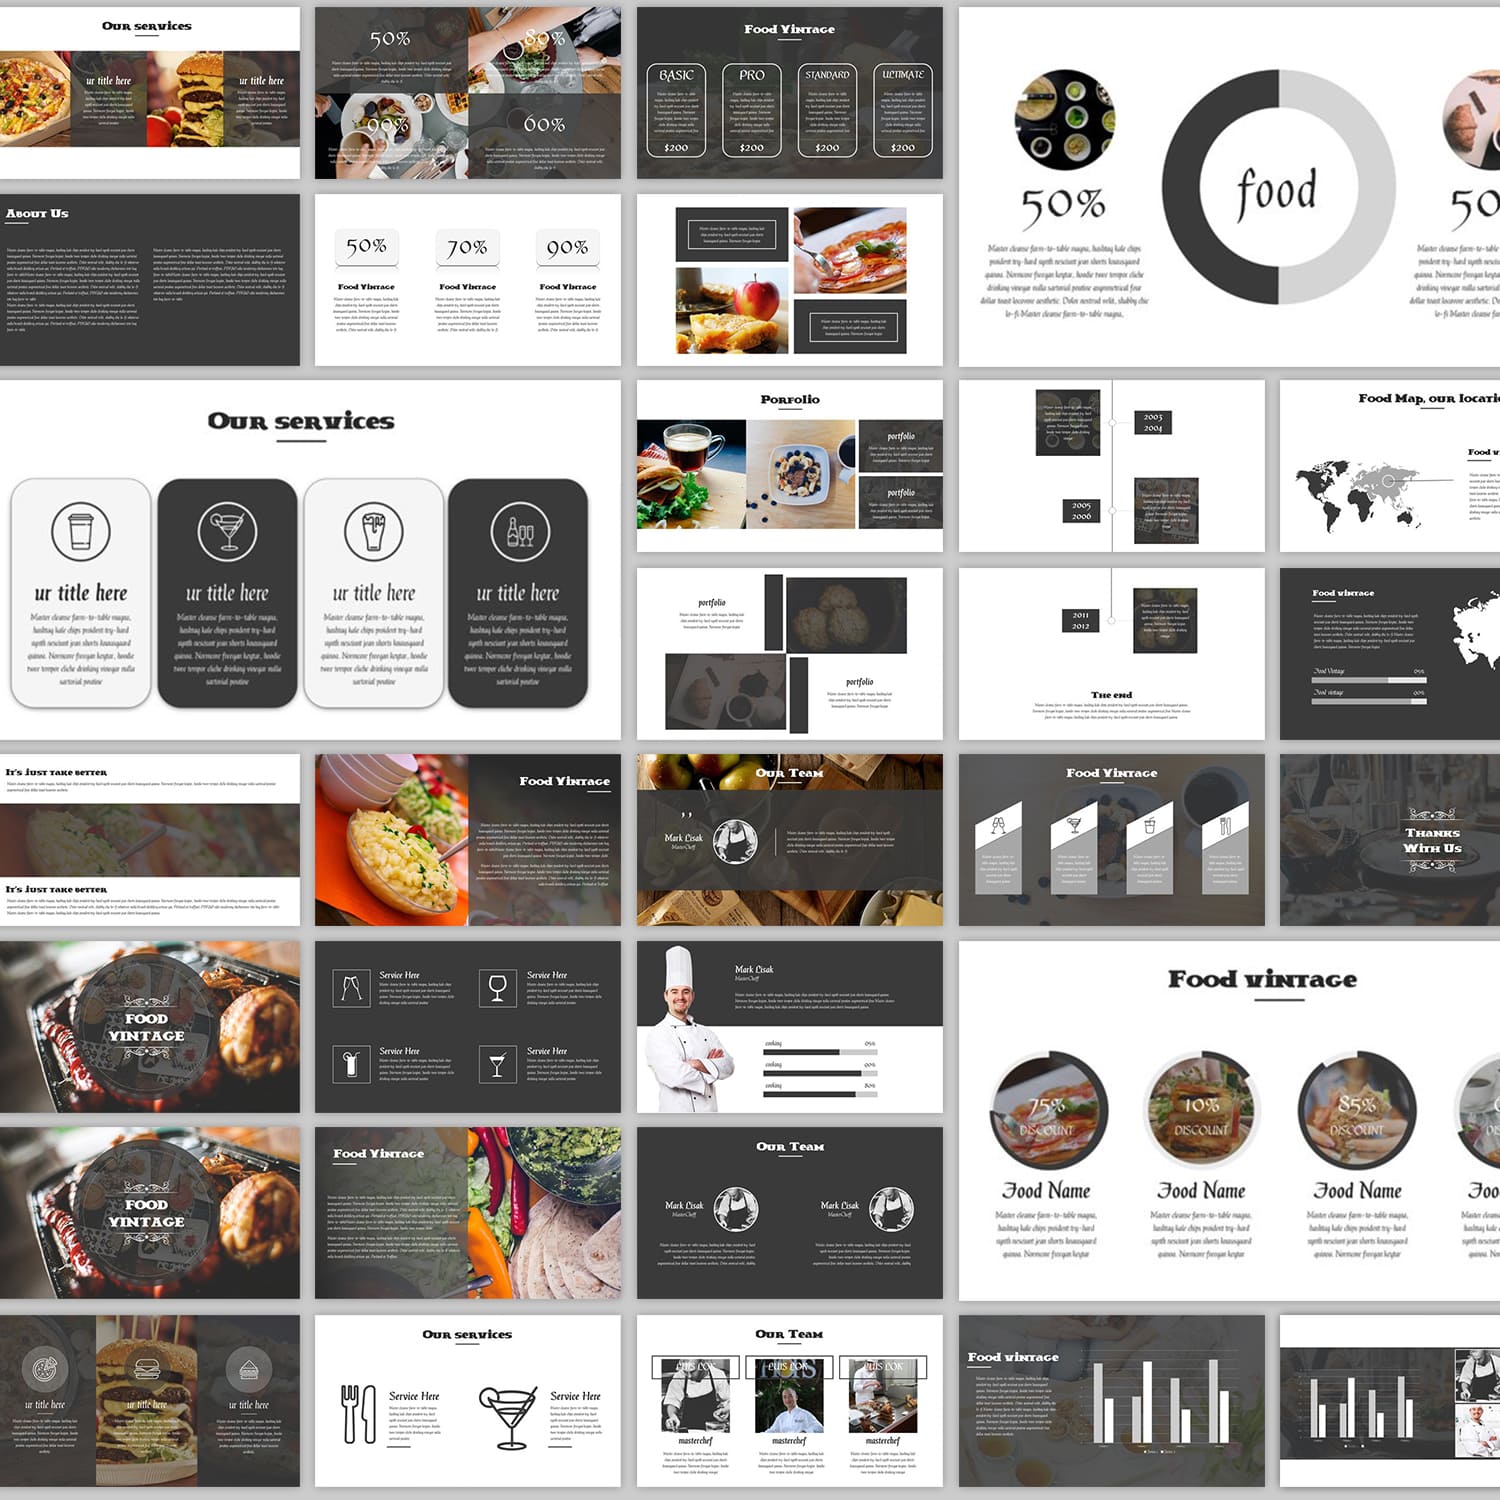 Food Vintage Powerpoint Template cover.